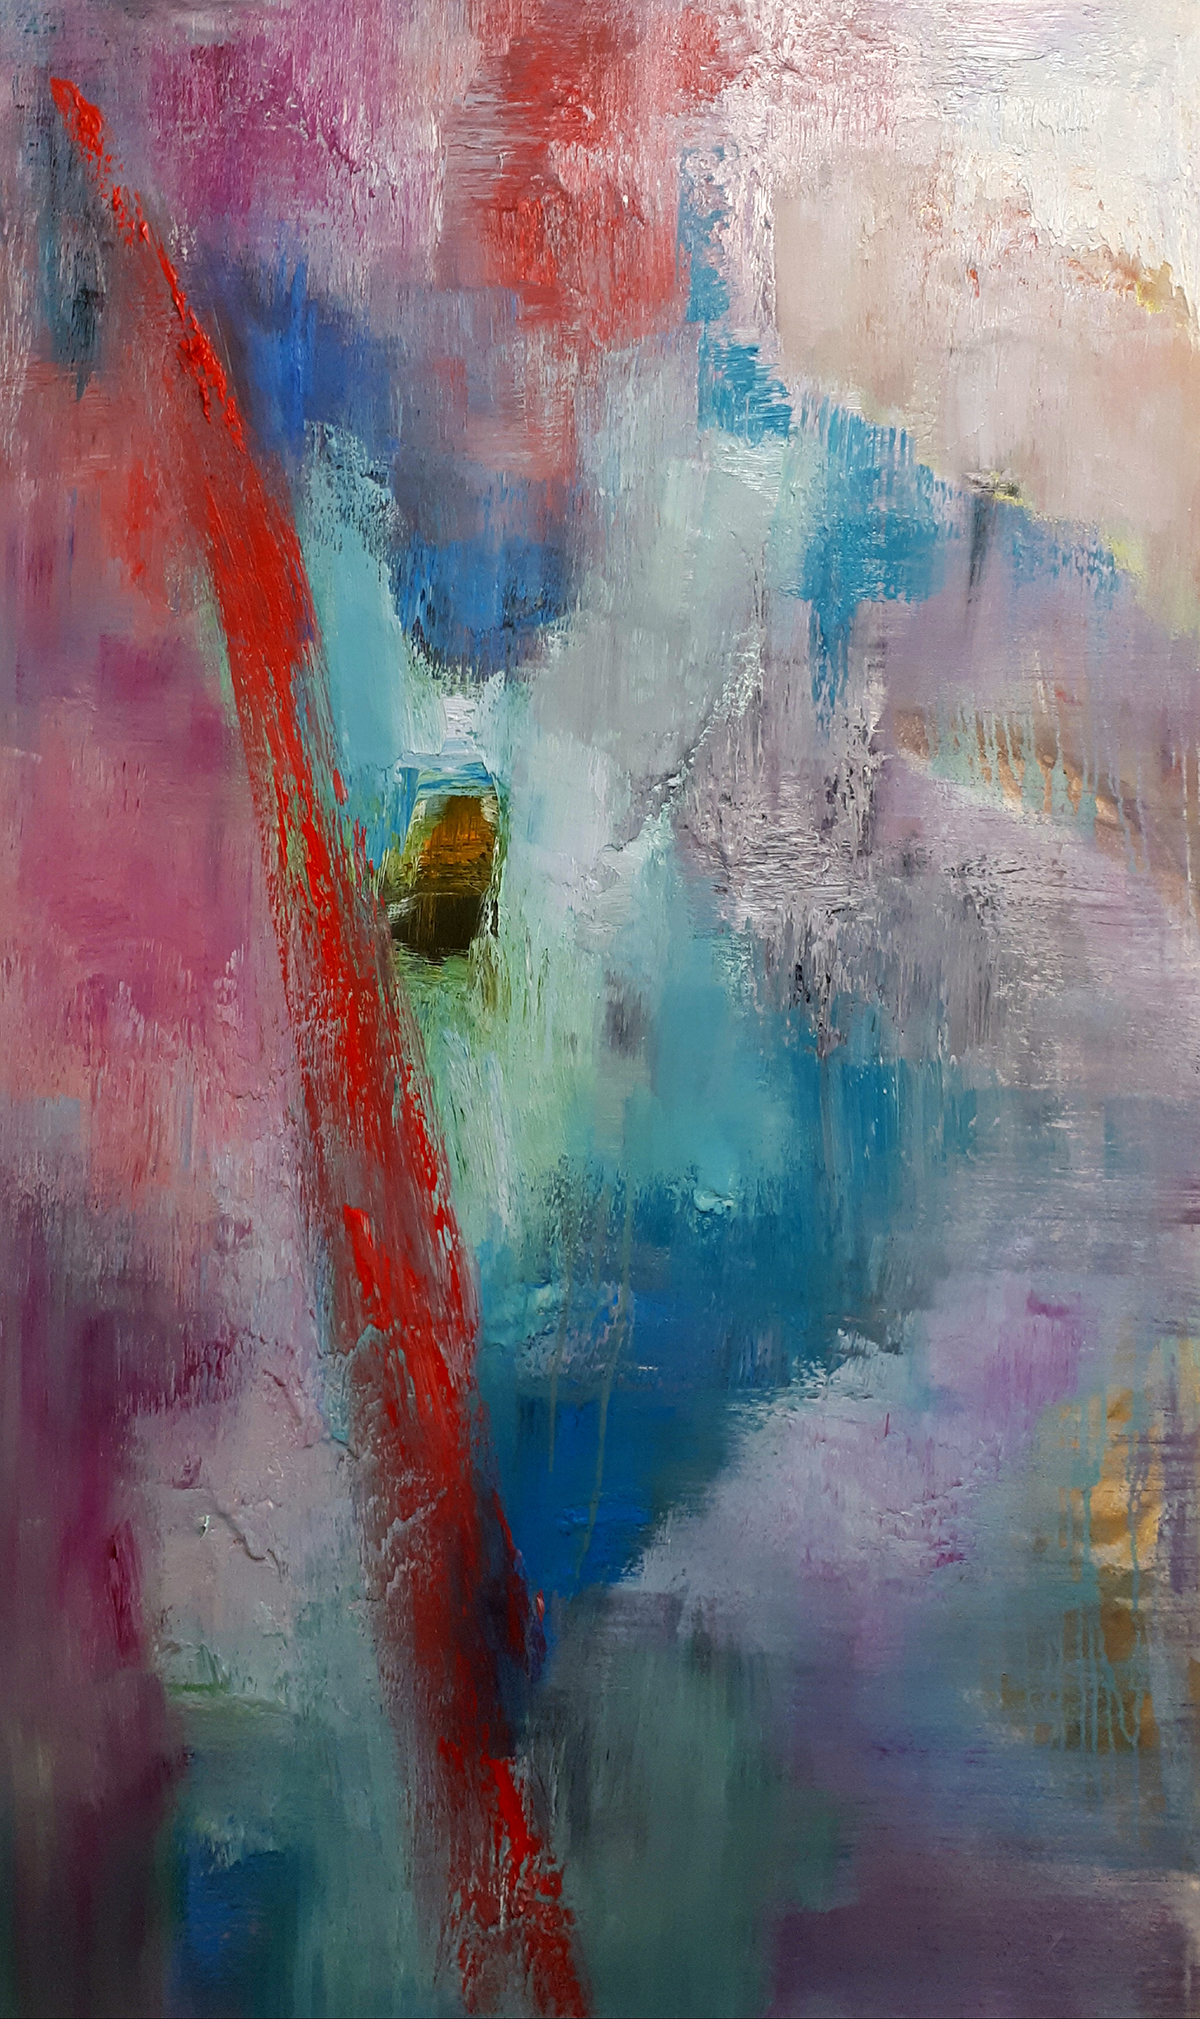 Earth's Lost Remains I - oil on canvas - 157 x 97cm